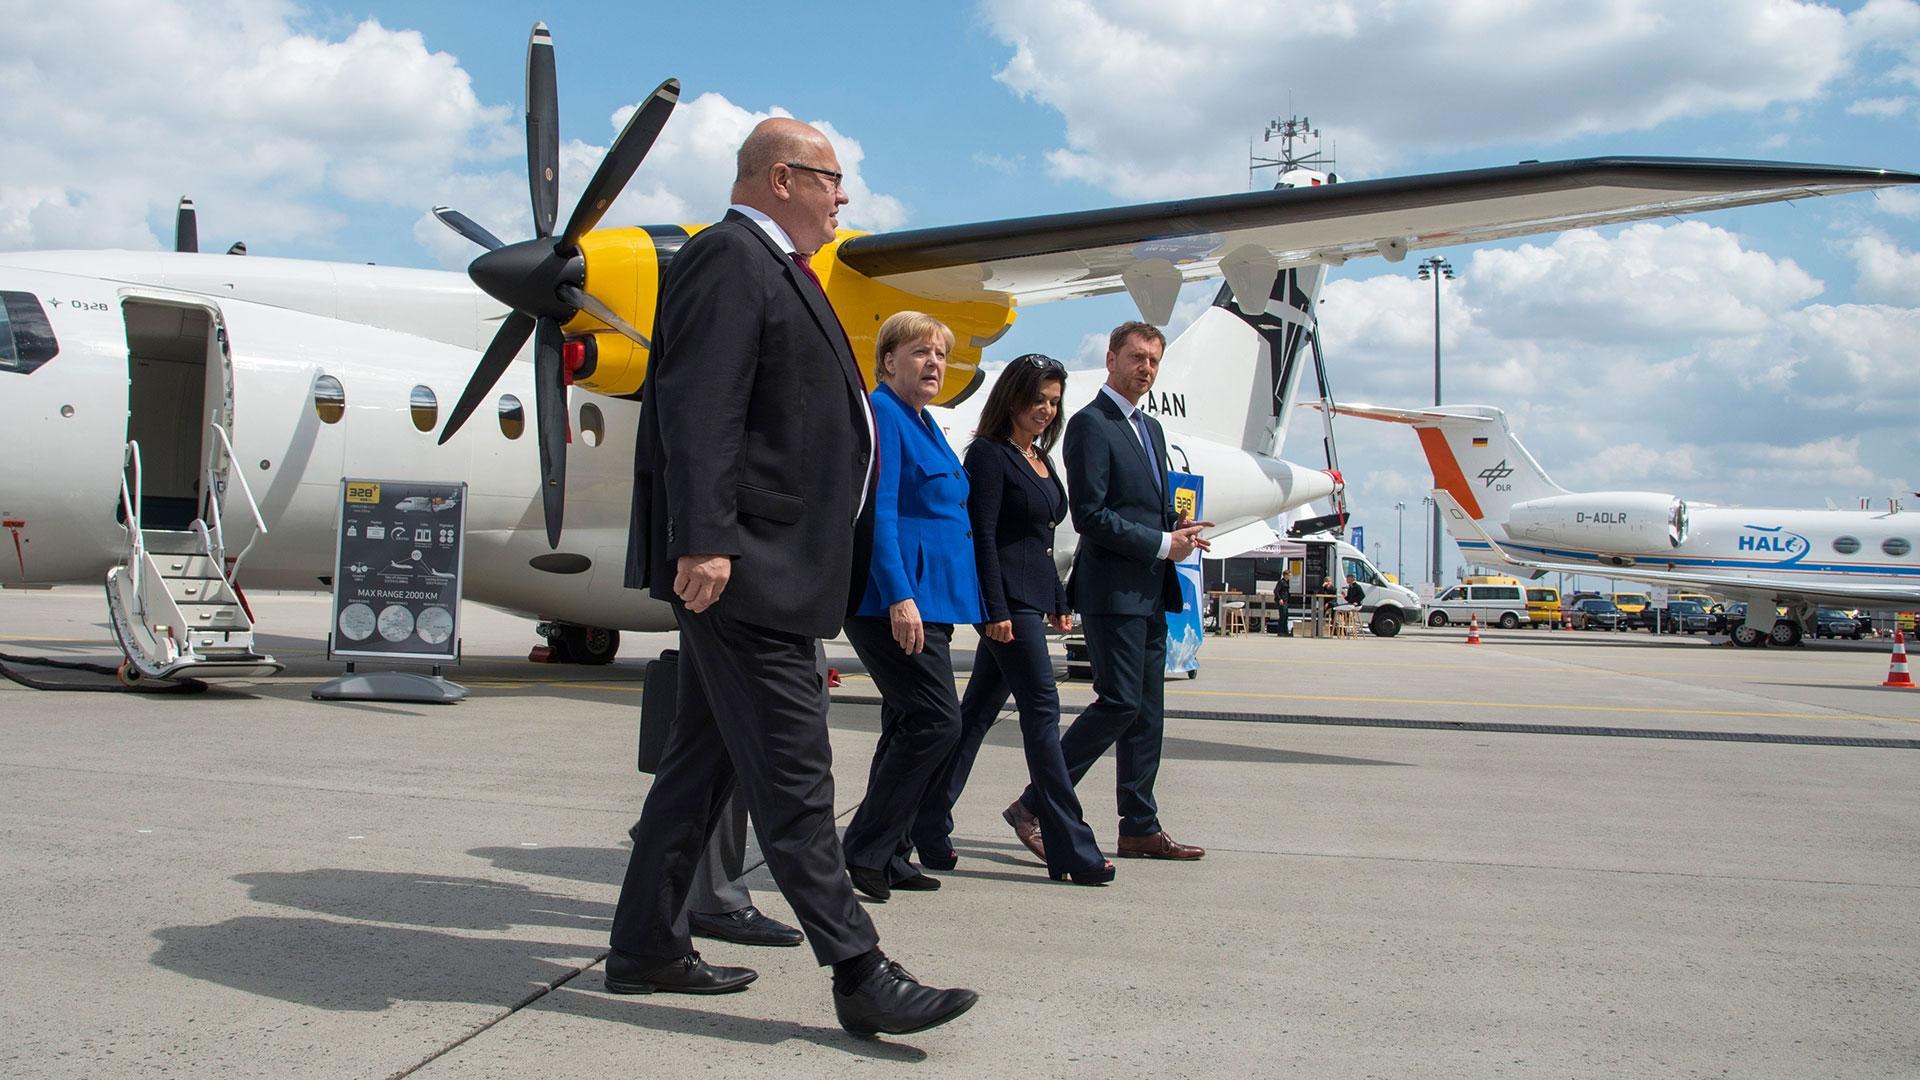 German Federal Chancellor Merkel and Economic Affairs and Energy Minister Altmaier visit the first National Aeronautics Conference